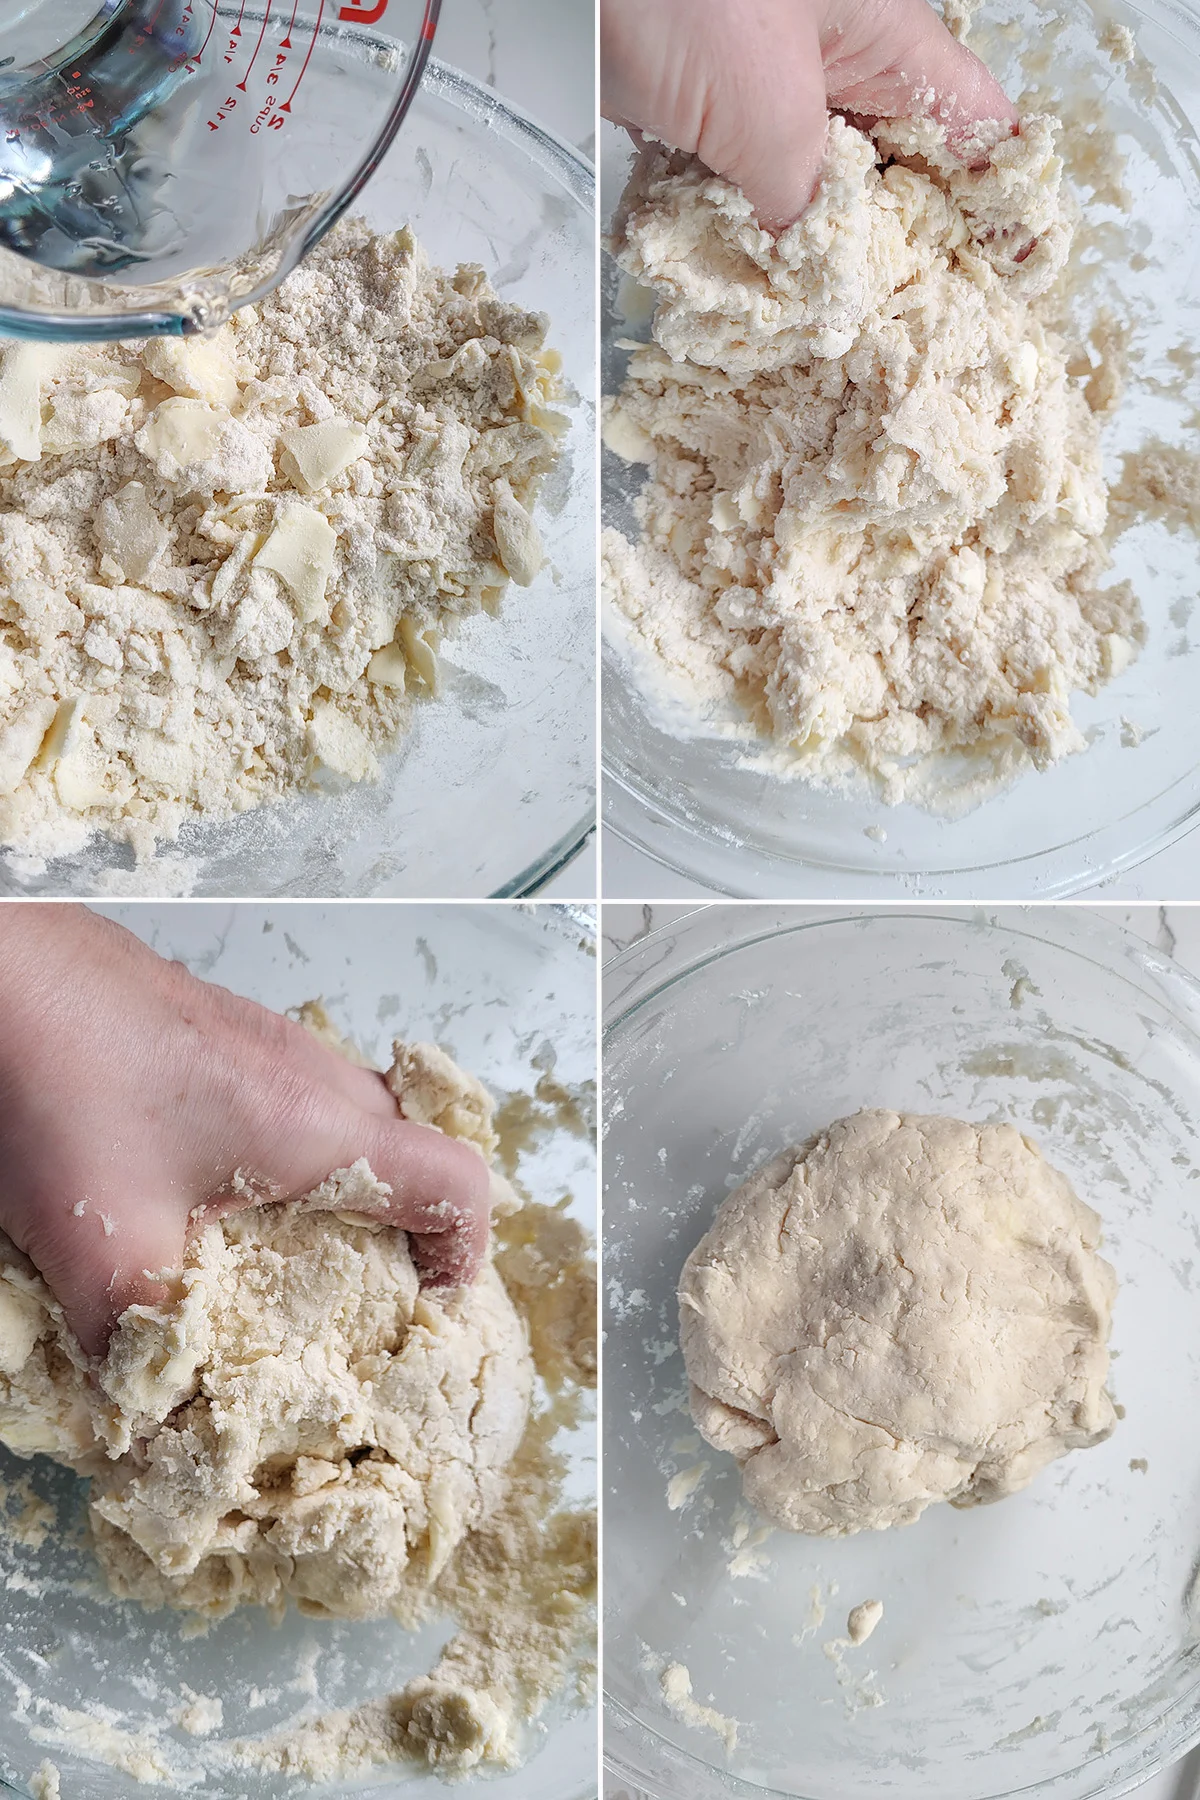 A bowl of pie dough being mixed by hand.